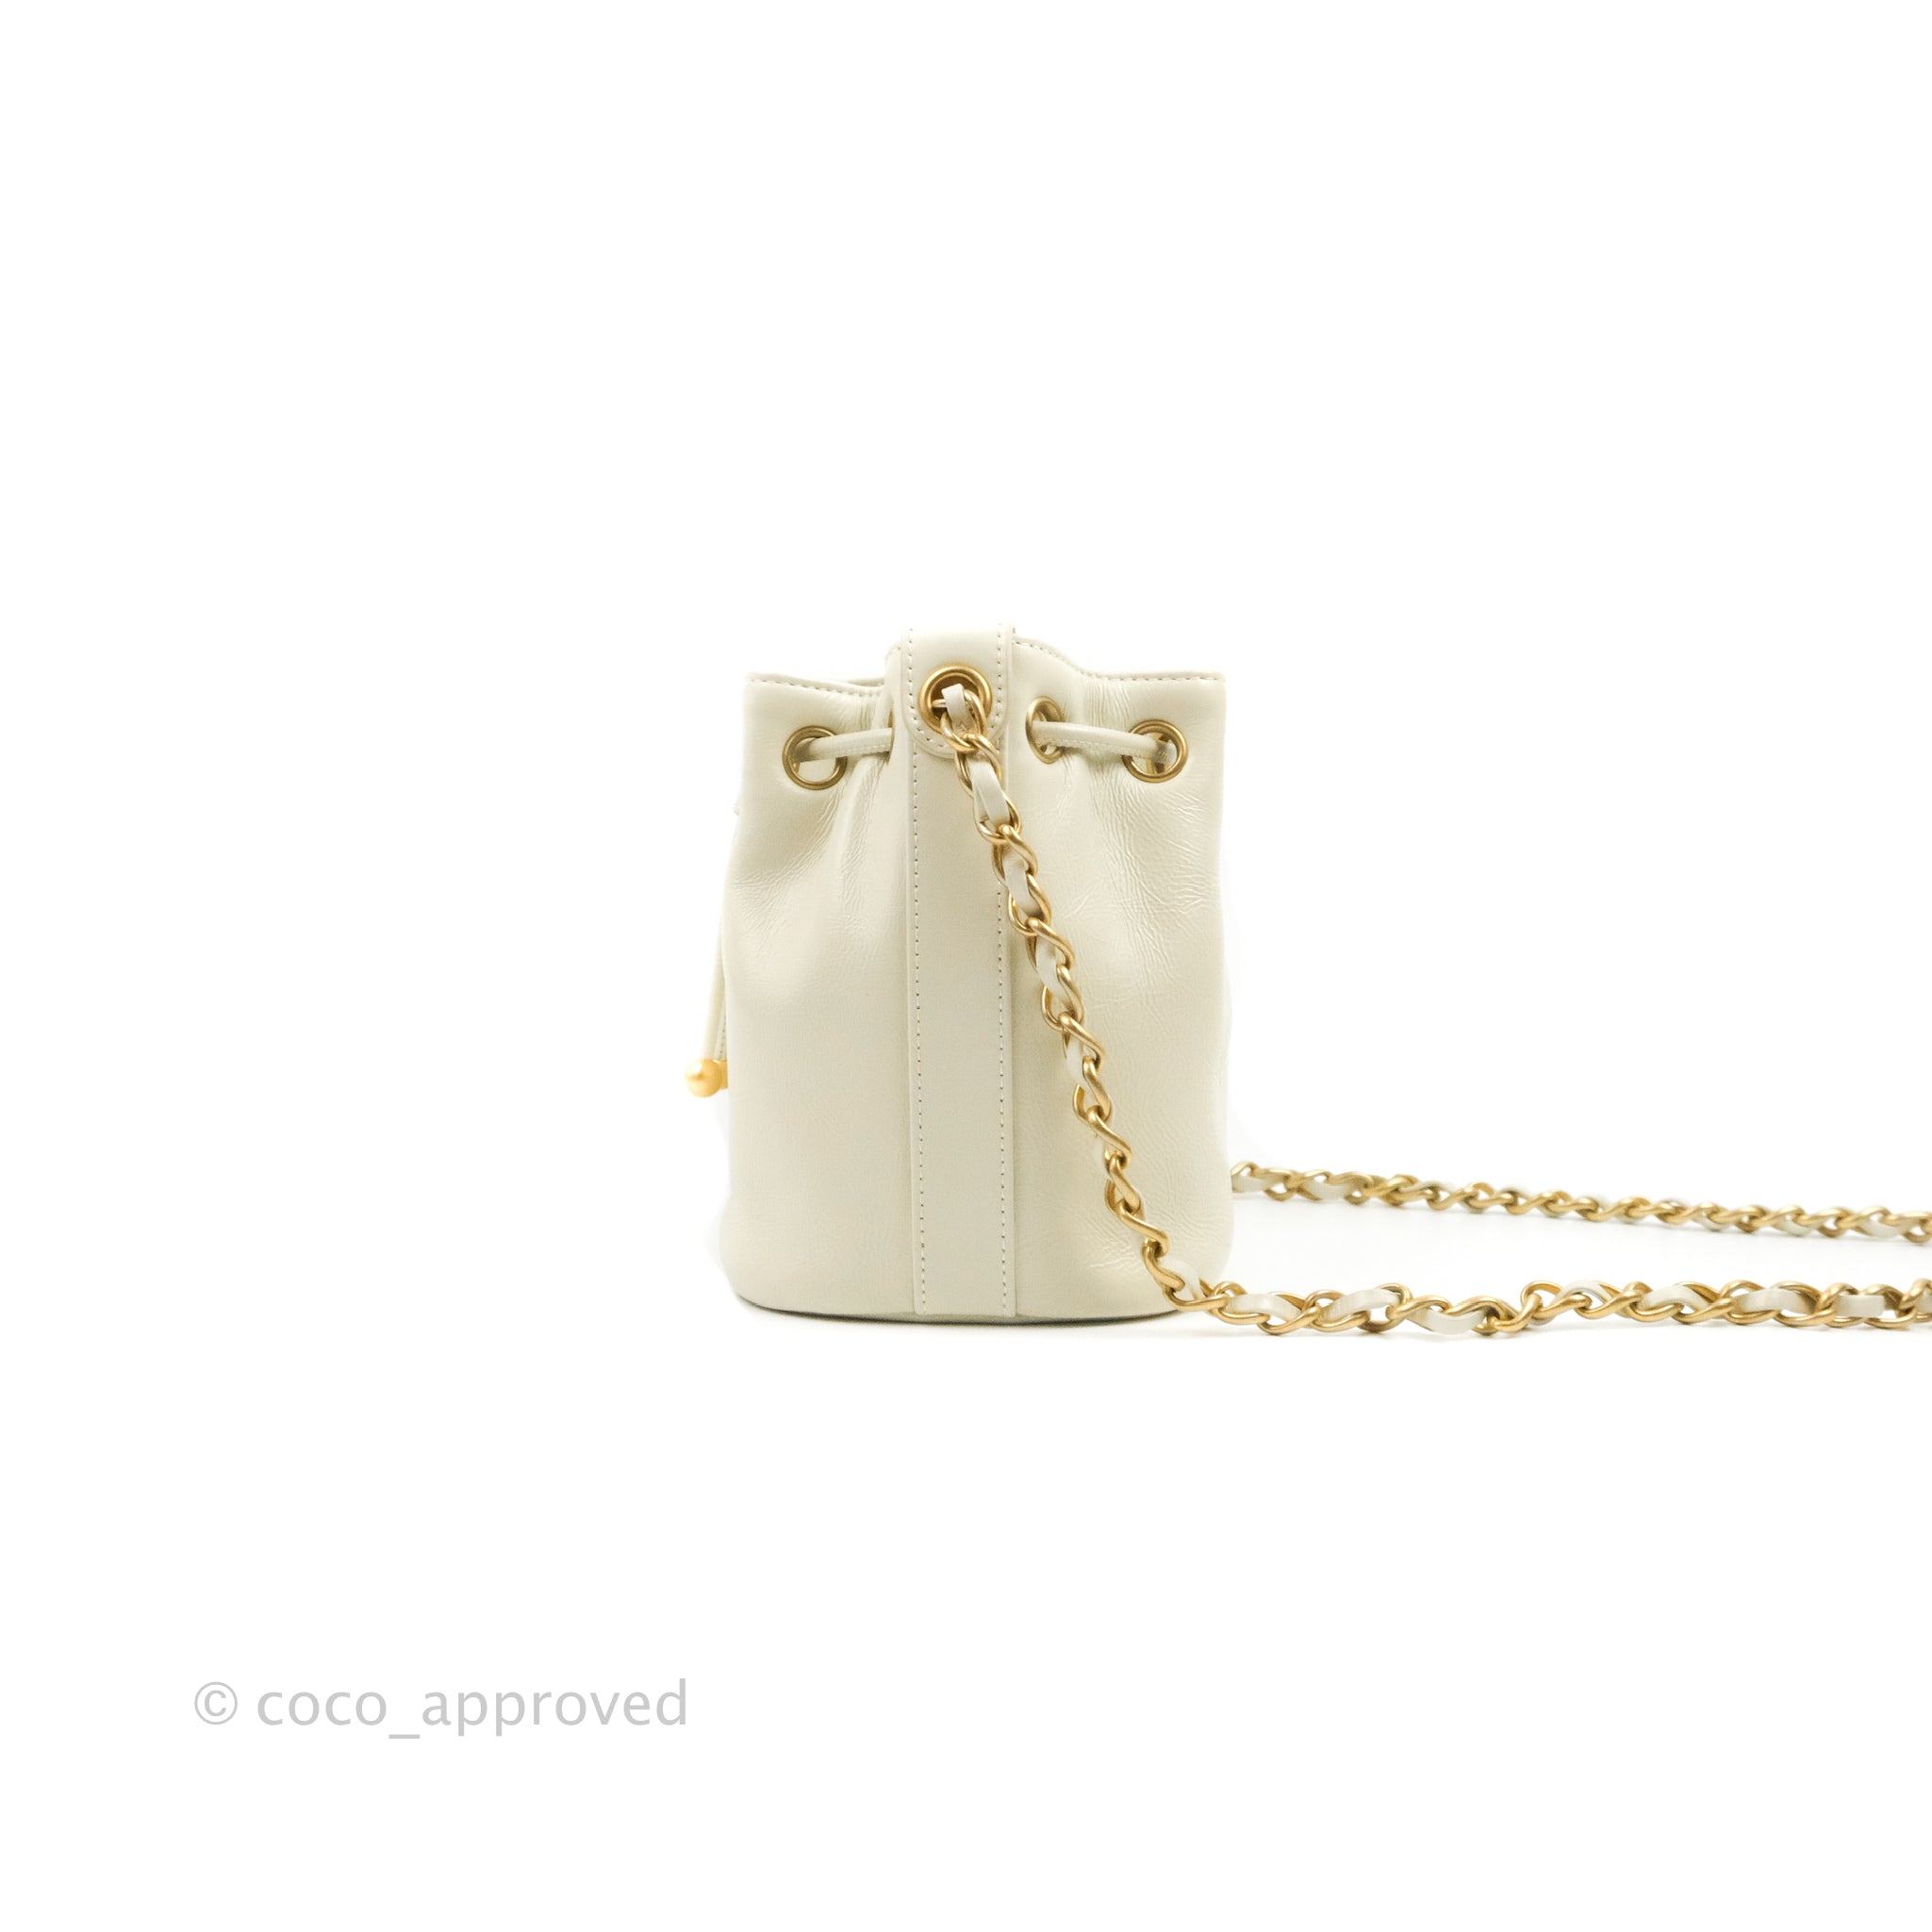 Chanel Mini Bucket with Chain AP2859 B08447 10601, White, One Size